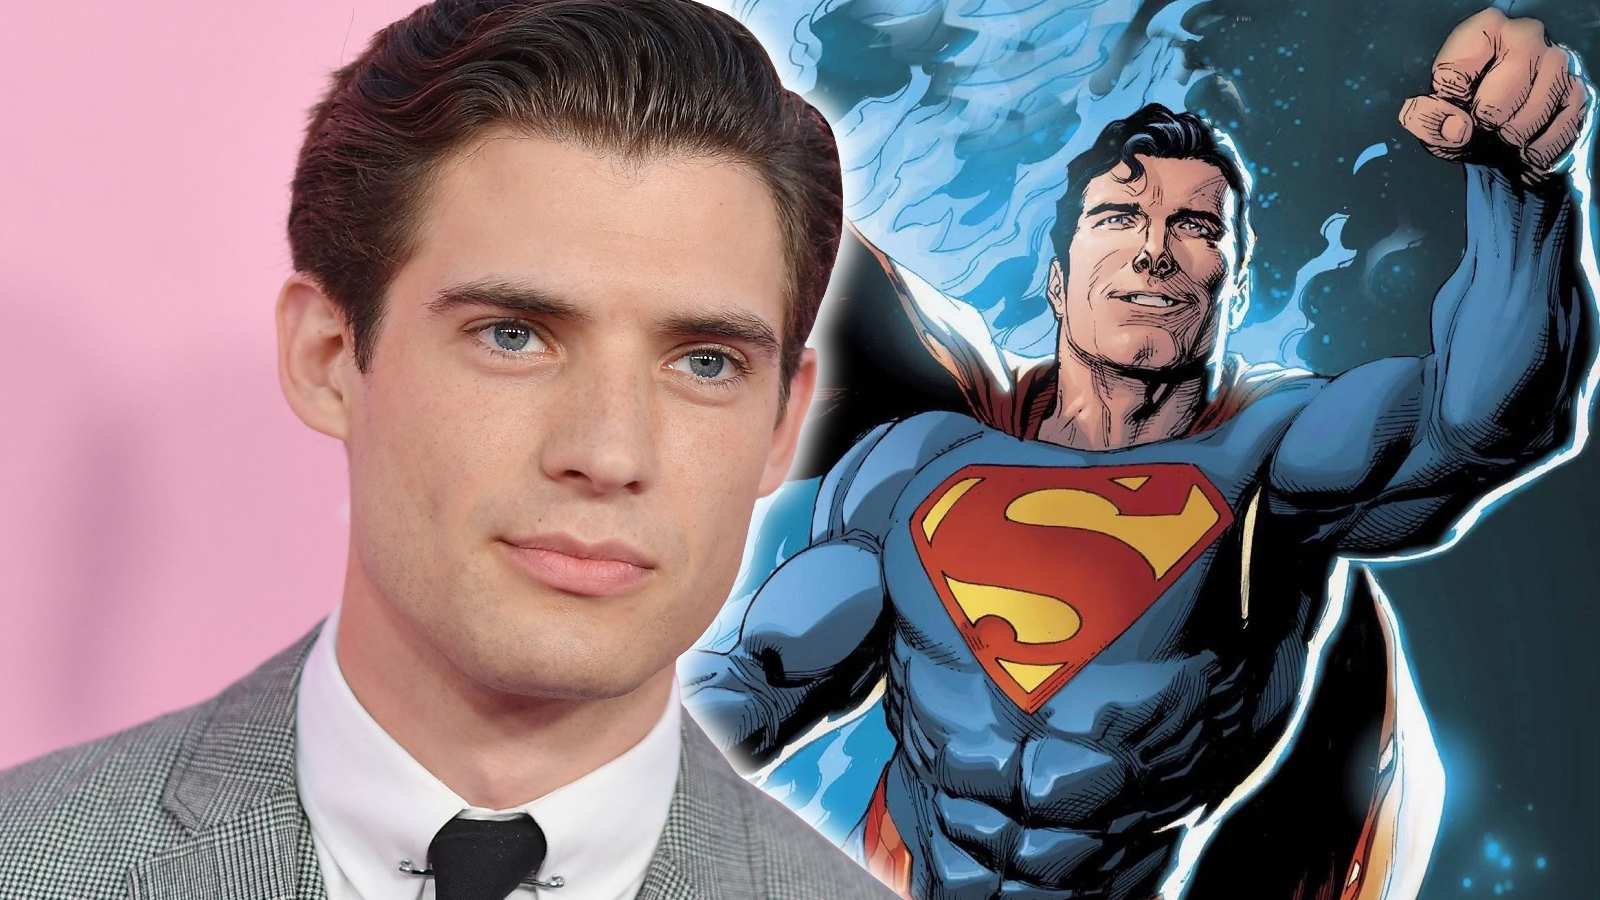 As we've all heard at this point, Henry Cavill is coming back as supes.  What are all of your opinions on this? : r/superman